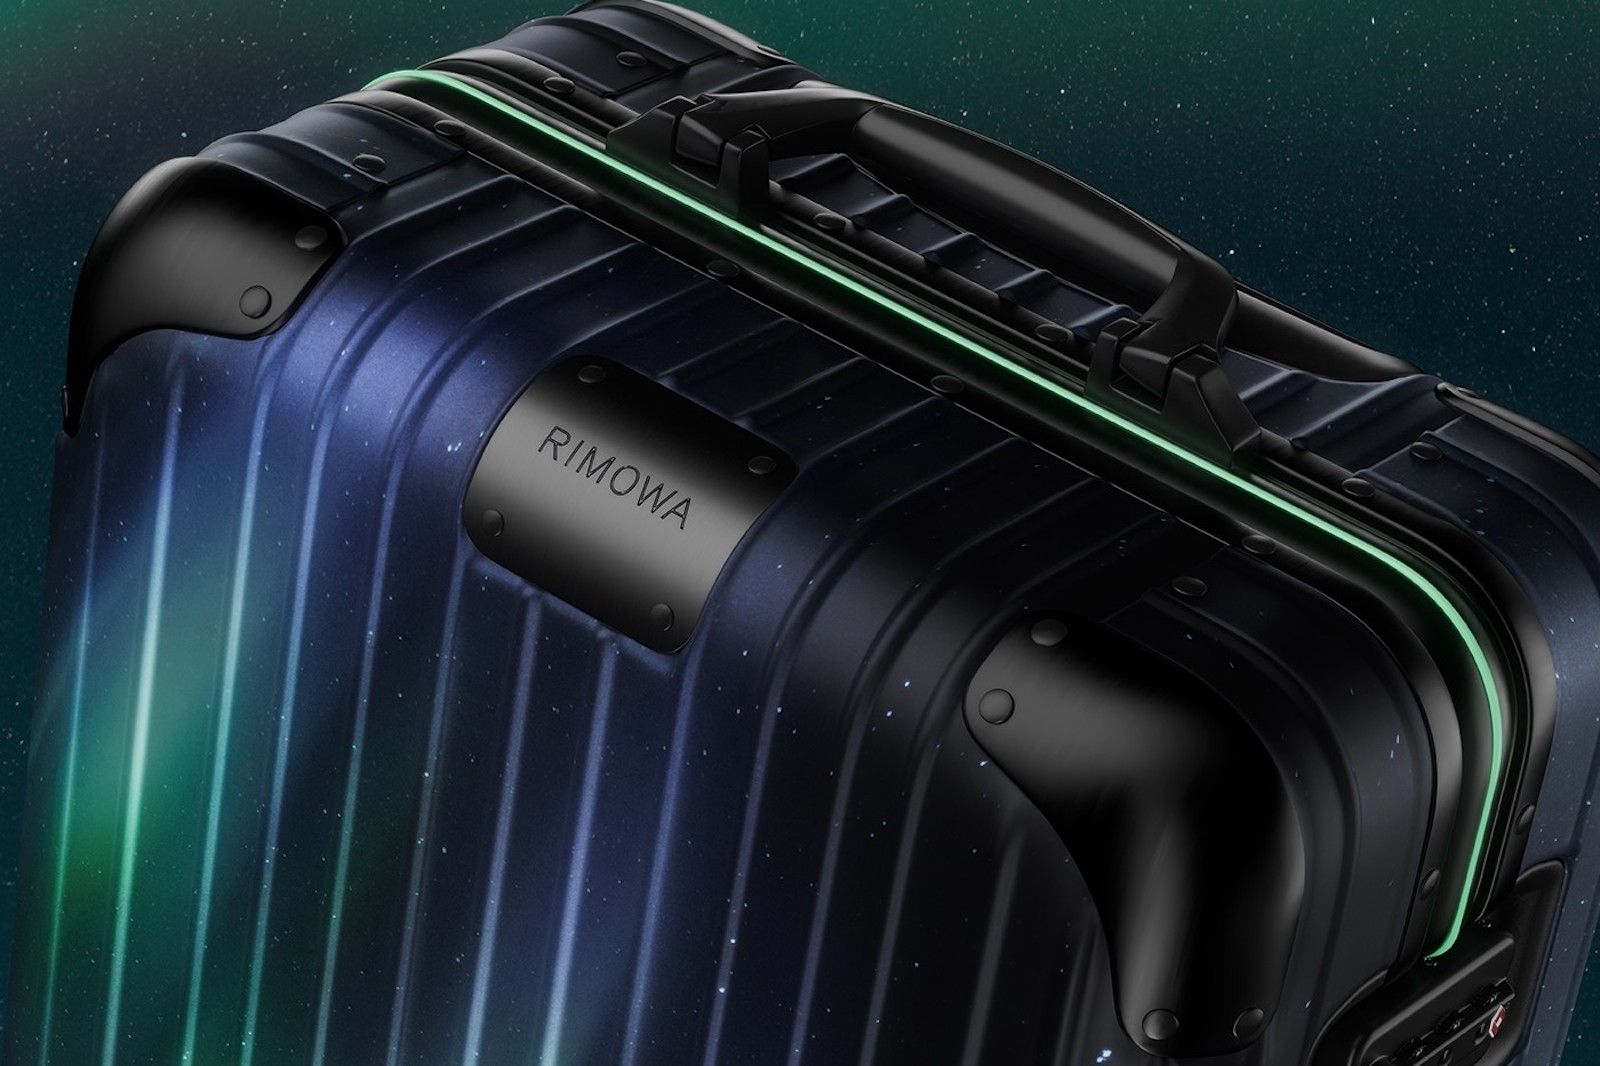 RIMOWA Essential Suitcase Collection